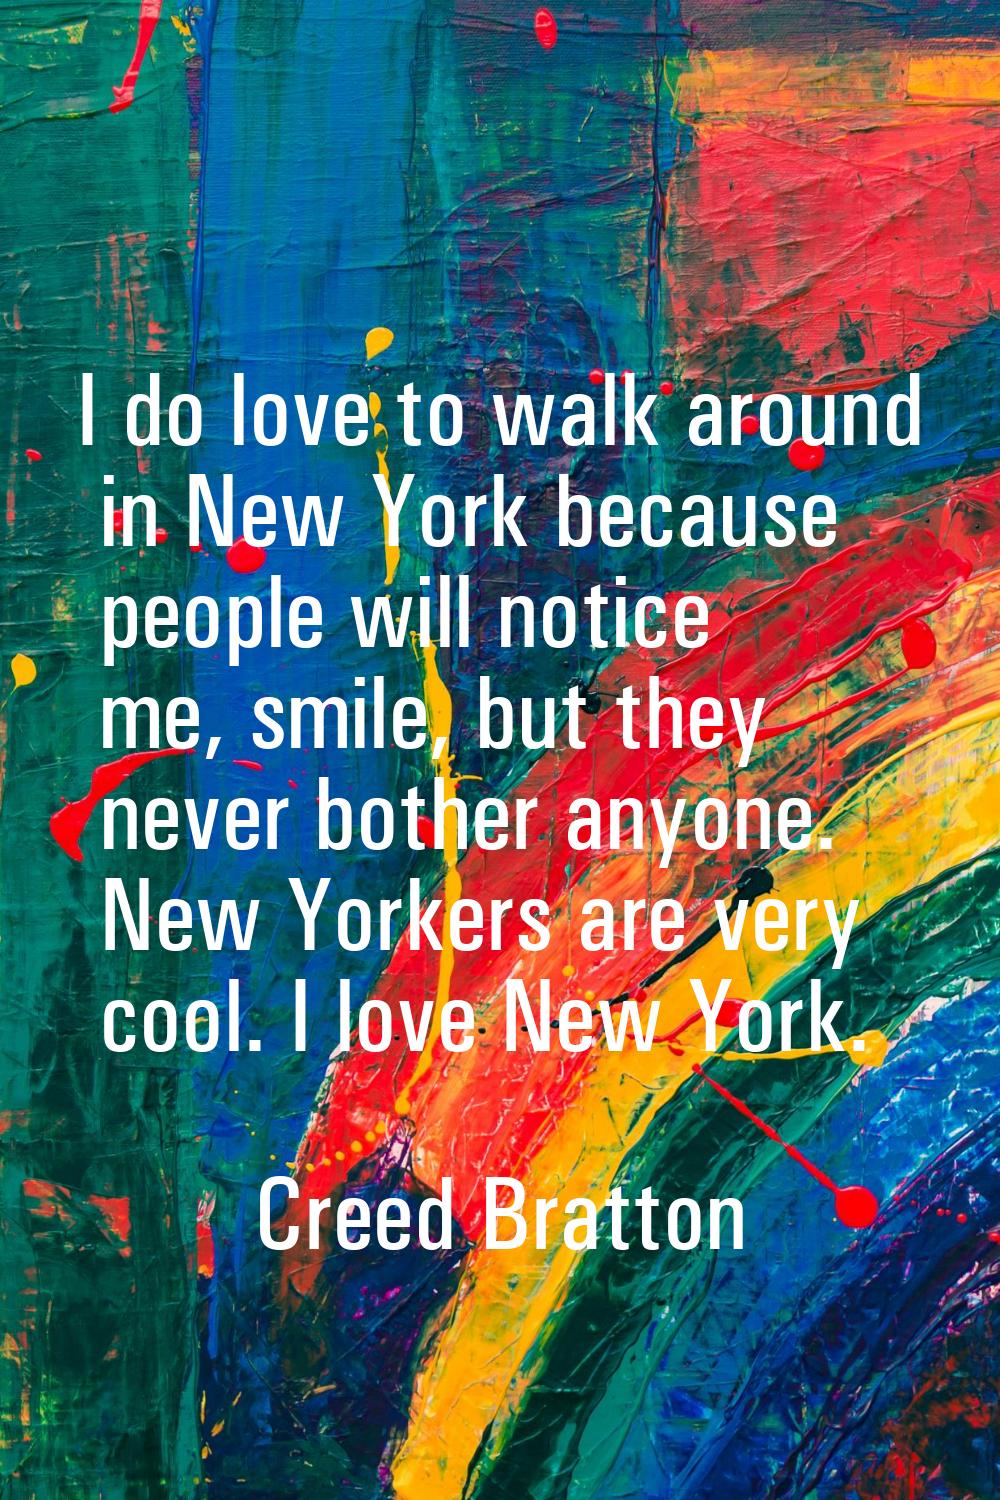 I do love to walk around in New York because people will notice me, smile, but they never bother an